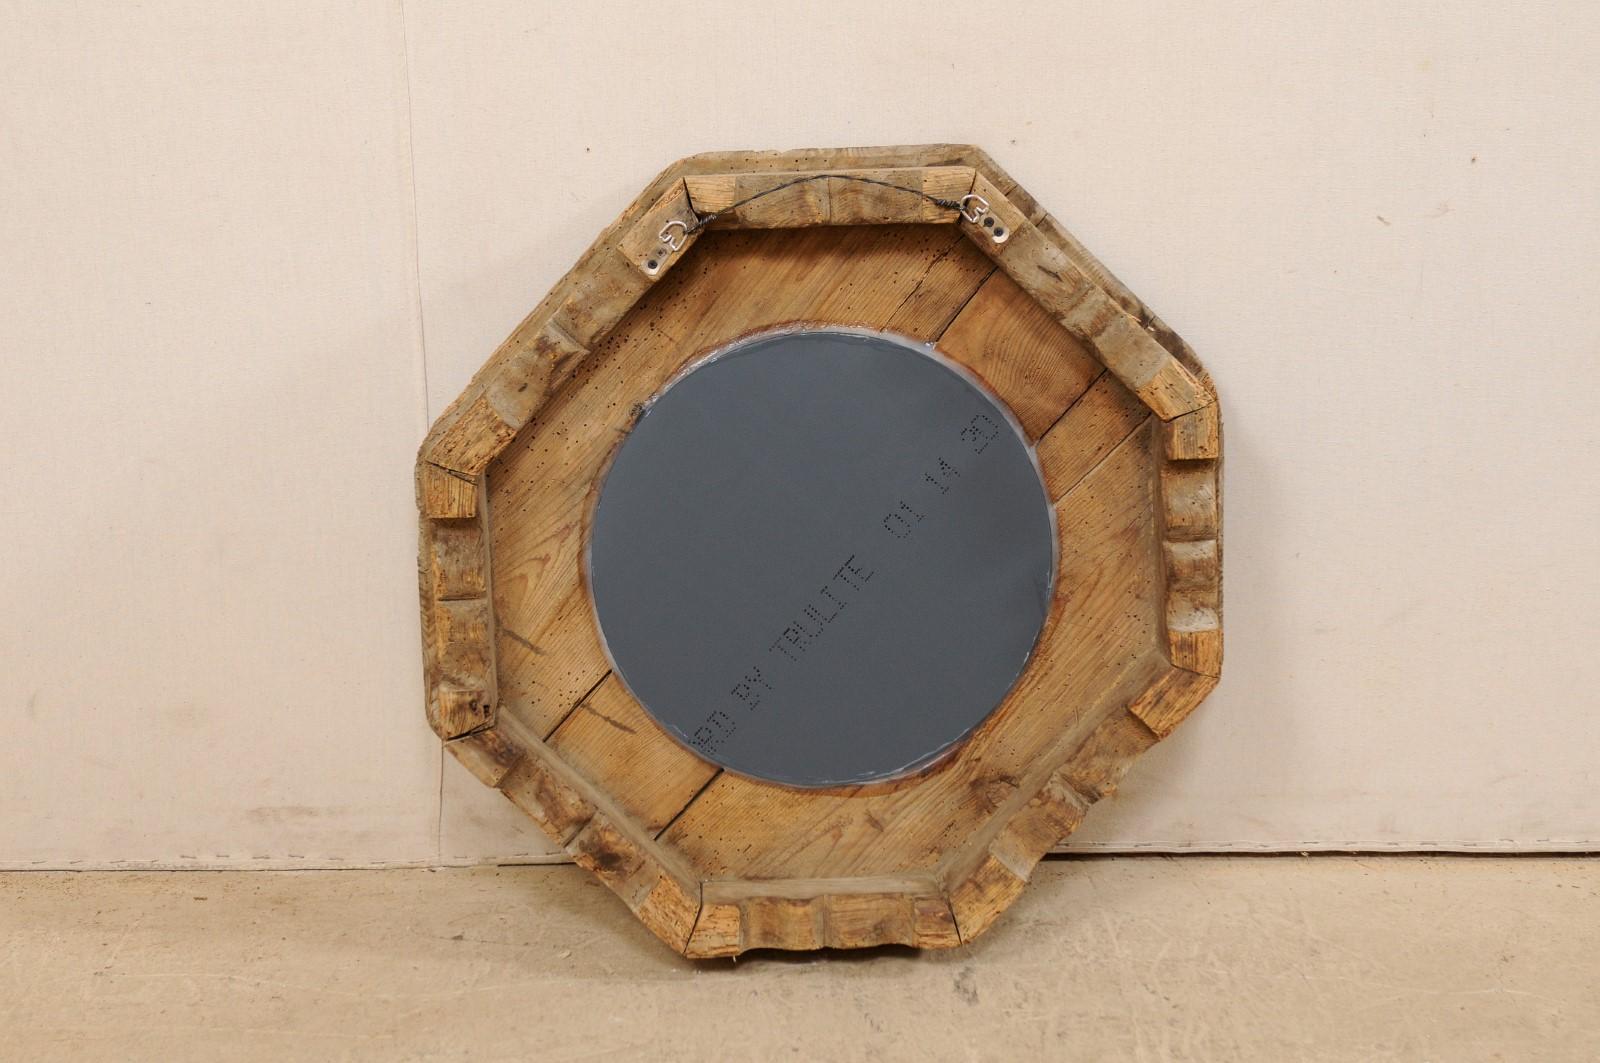 Unique Octagonal-Shaped Mirror with Great Side Profile and Projection from Wall 3